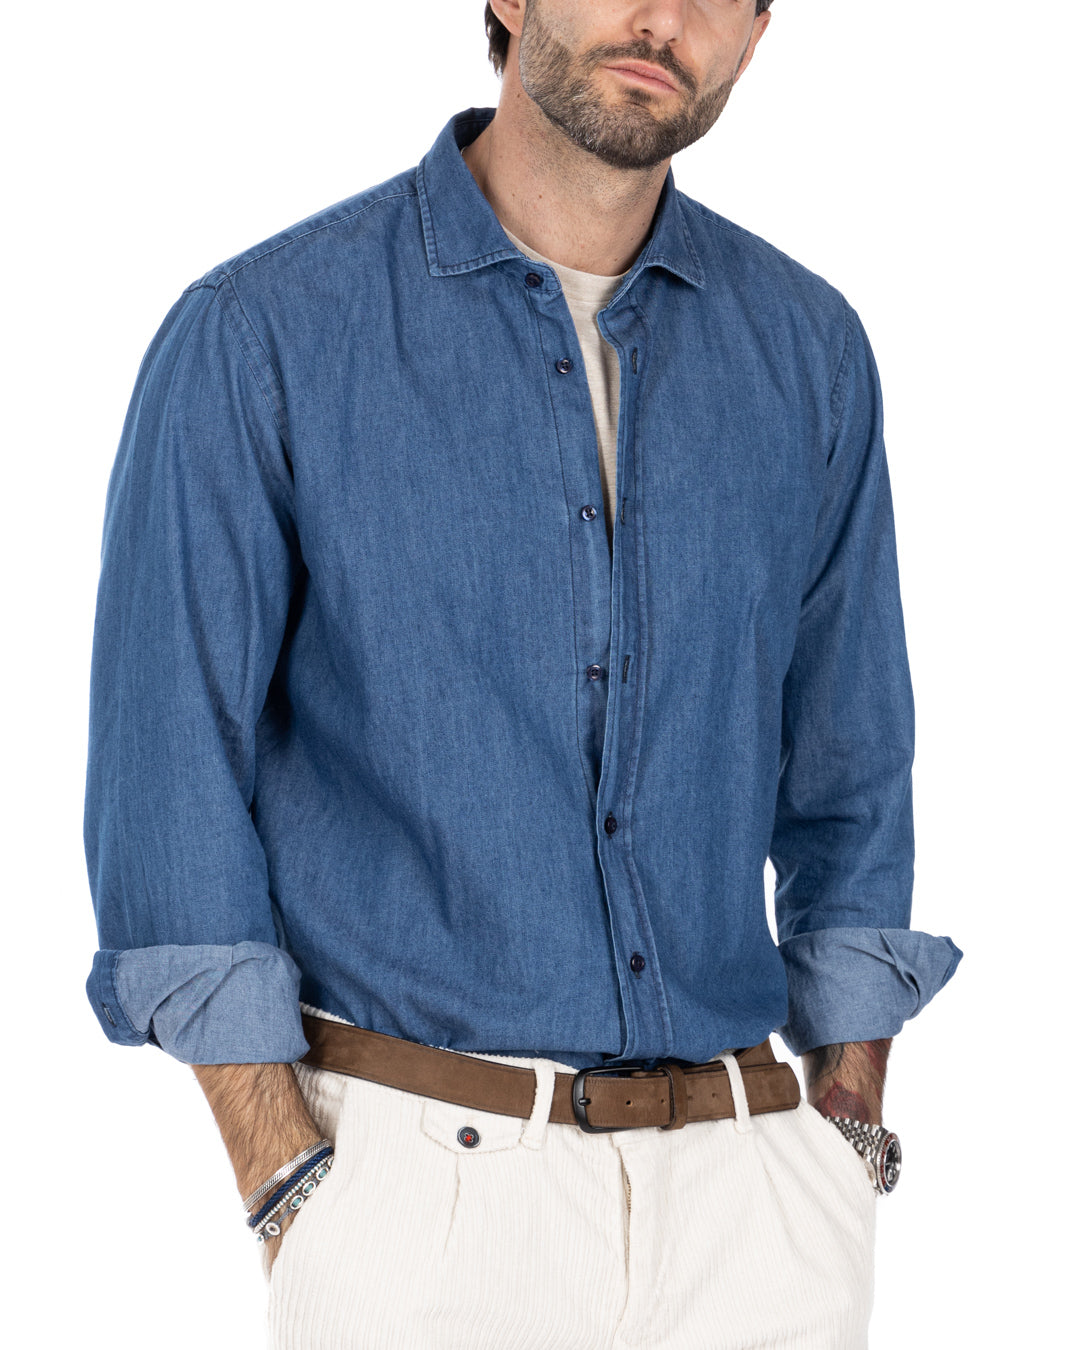 Shirt - classic basic light wash in jeans